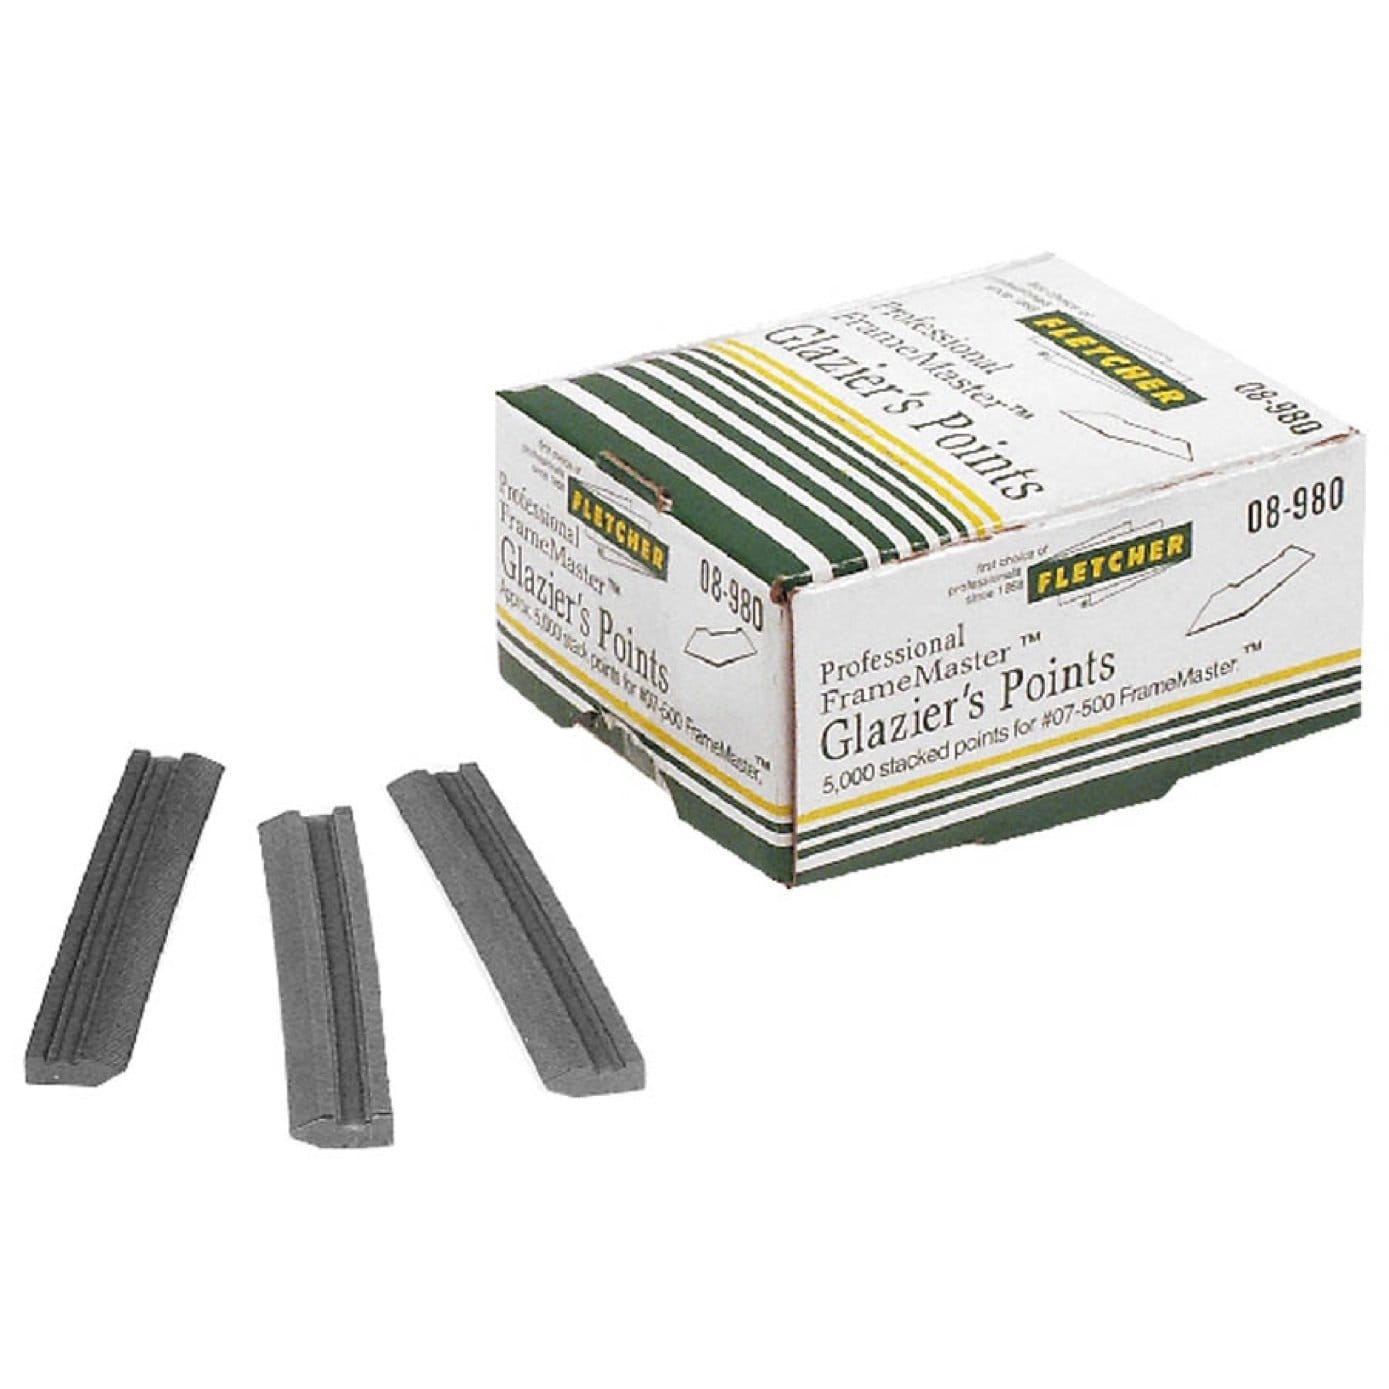 Fletcher PUSH POINTS Tabs for Picture Frame Framing Window Glazing Glazier  08711 -  Hong Kong